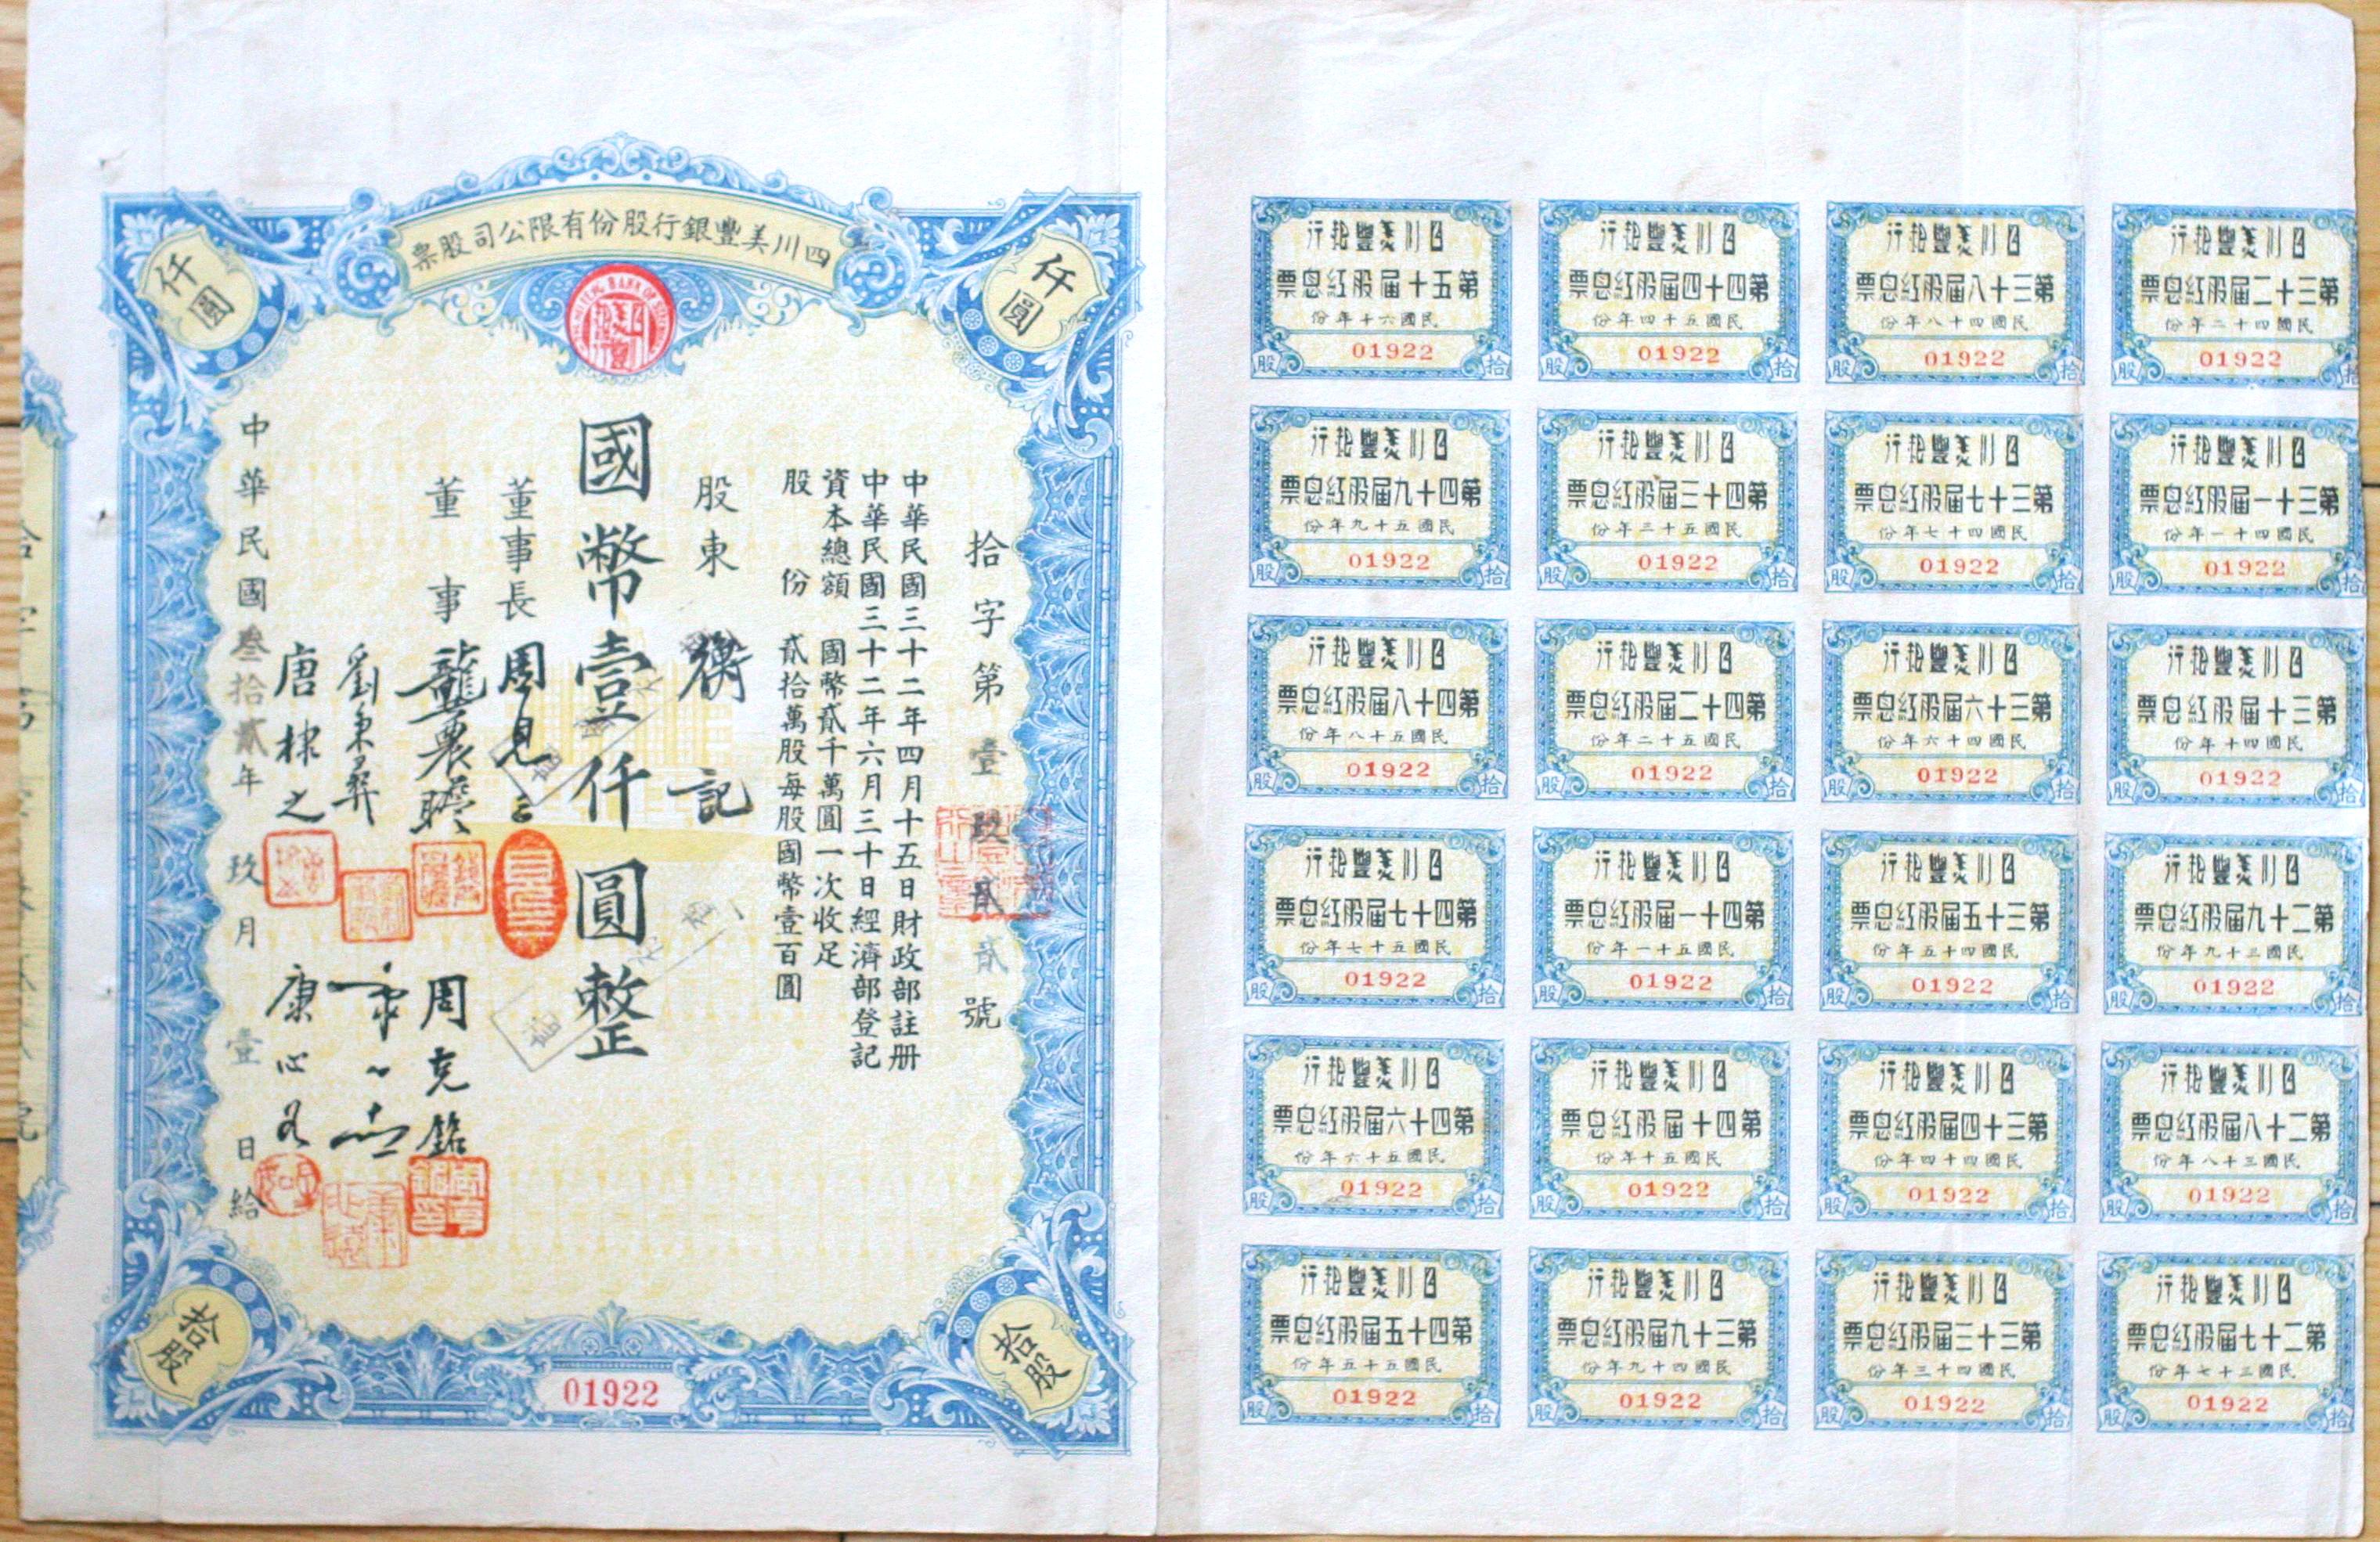 S0118, Sichuan Mei-Feng Bank Co., Stock Certificate of 10 Shares, China 1937 - Click Image to Close